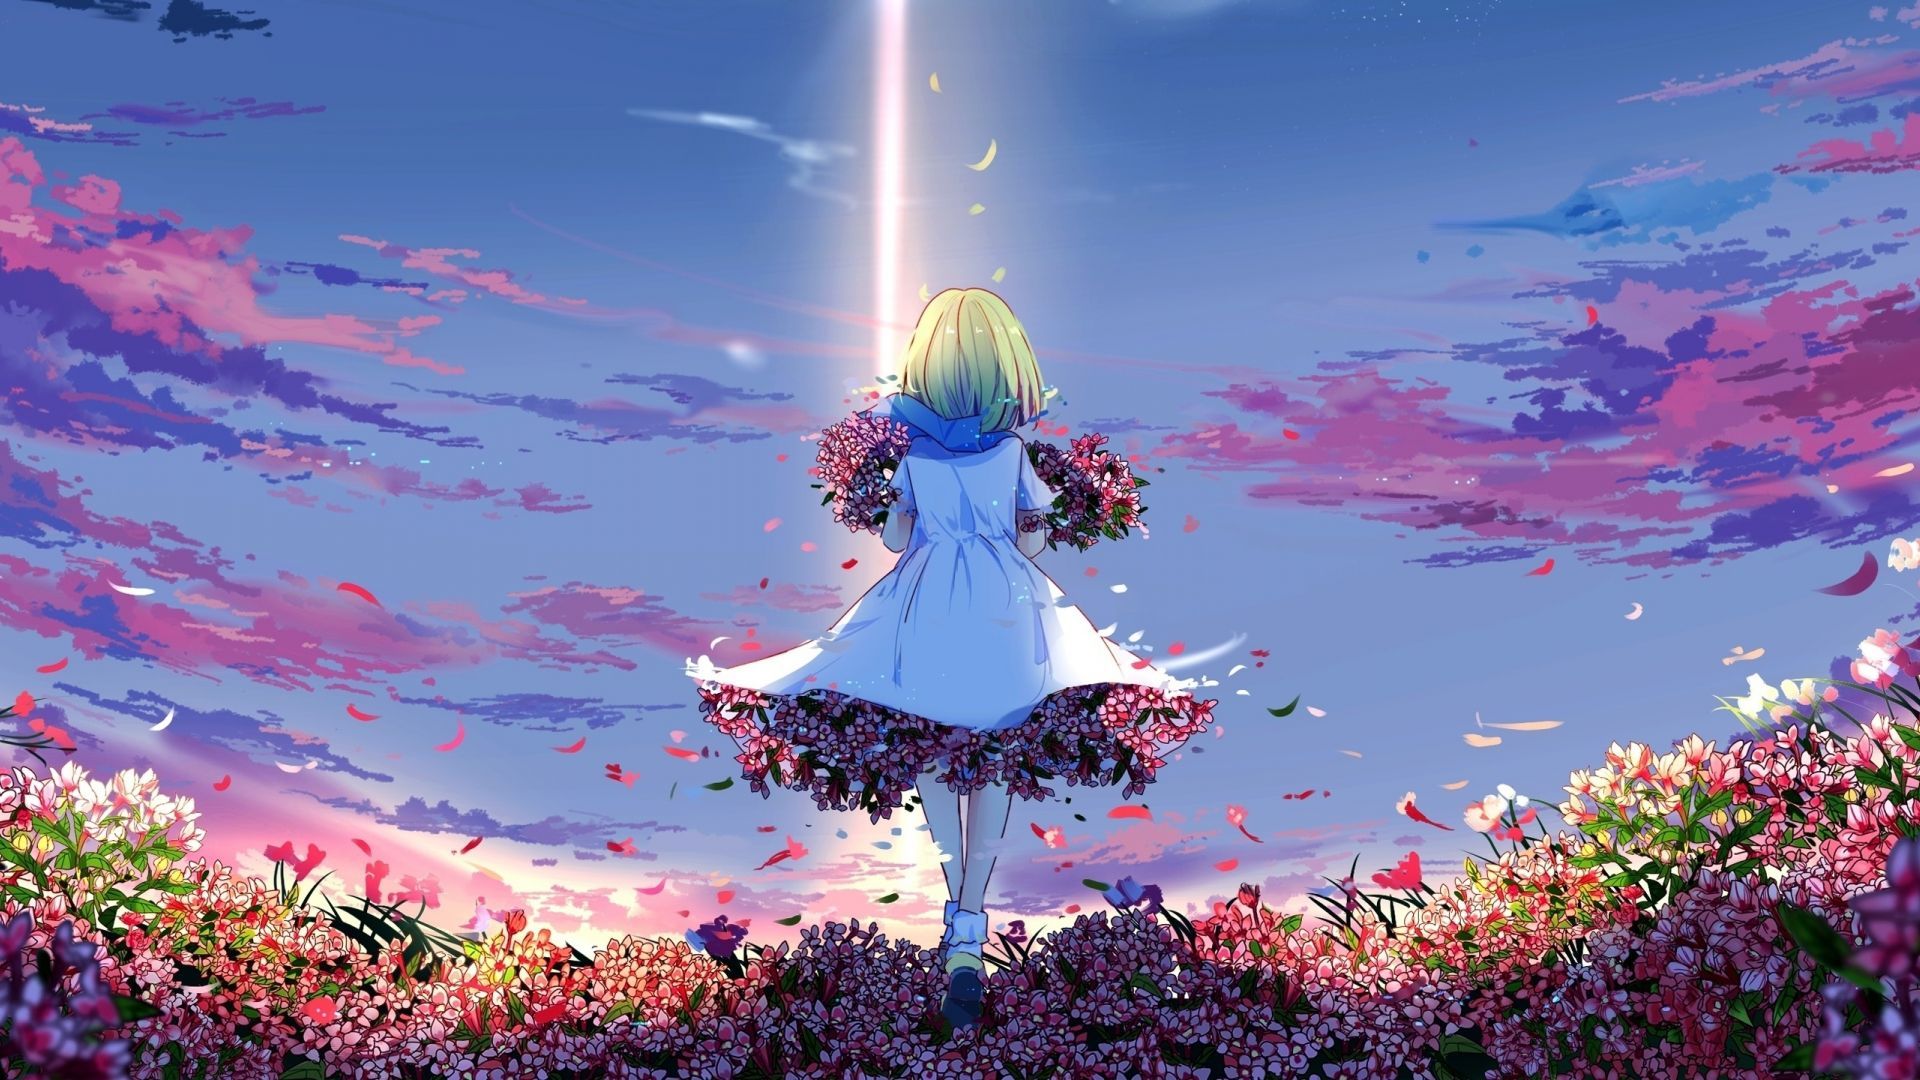 Desktop wallpaper anime girl, spring, meadow, flowers, girly, HD image, picture, background, 0f4fca